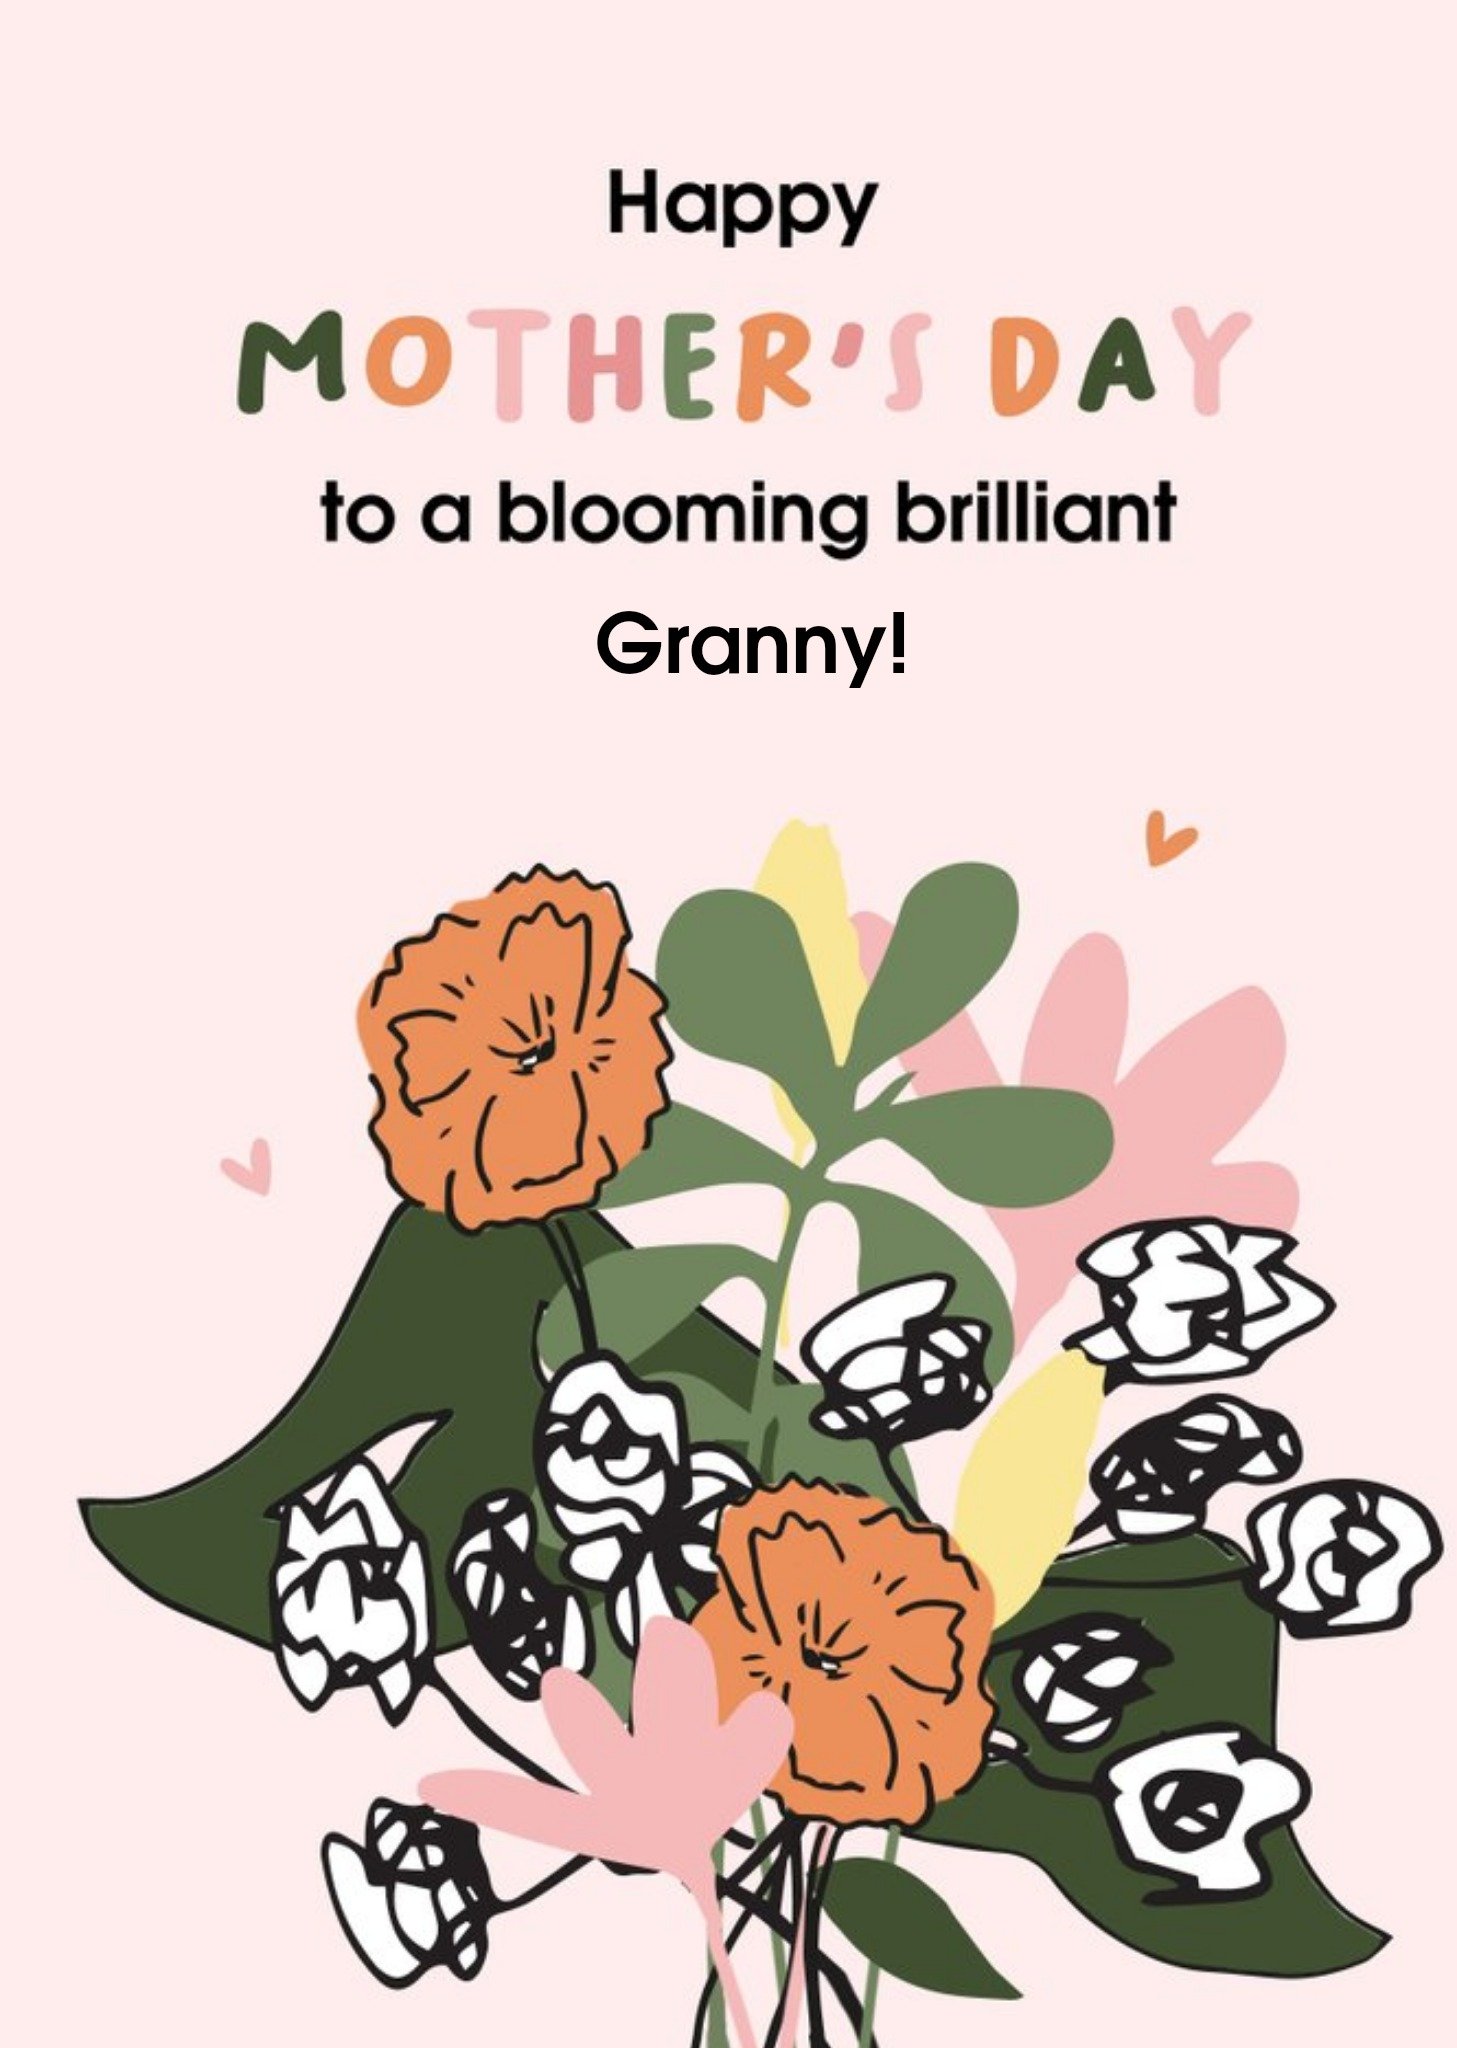 Moonpig Bloom Free Sian Roberts Floral Pink Mother's Day Card Ecard